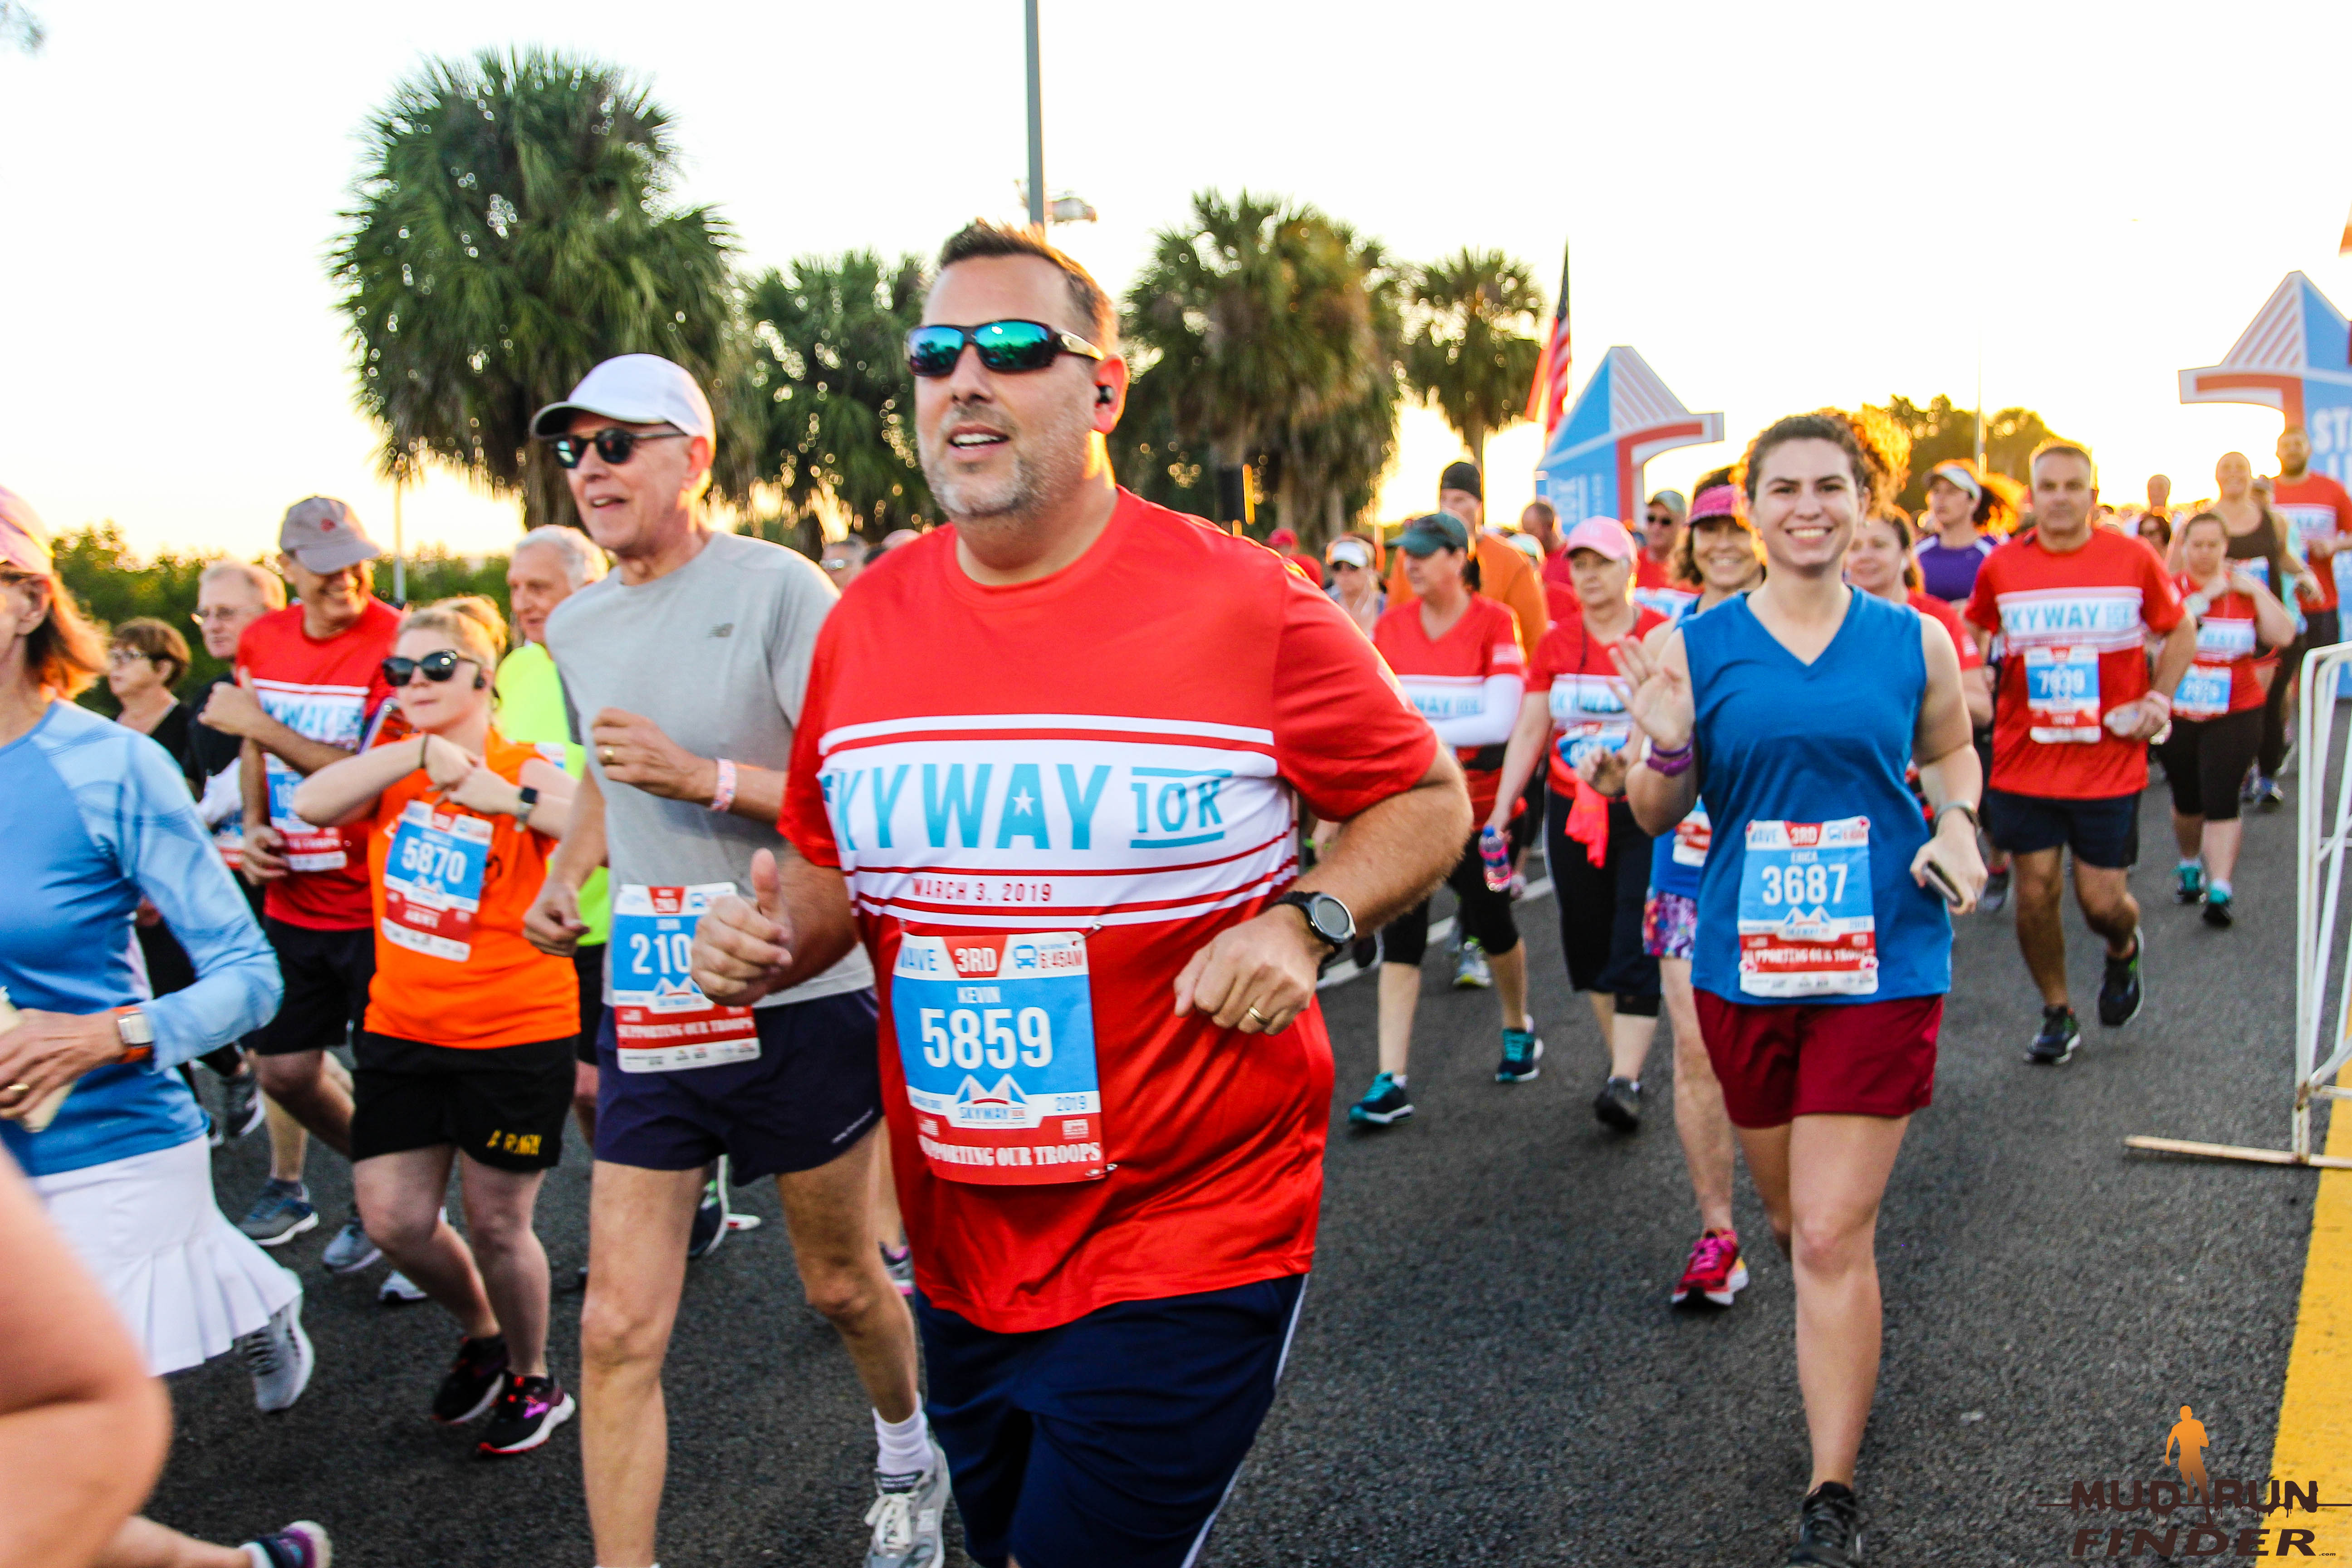 2nd Annual Skyway 10K on March 3rd, 2019 in St. Petersburg, FL | Full album available on MudRunFinder.com